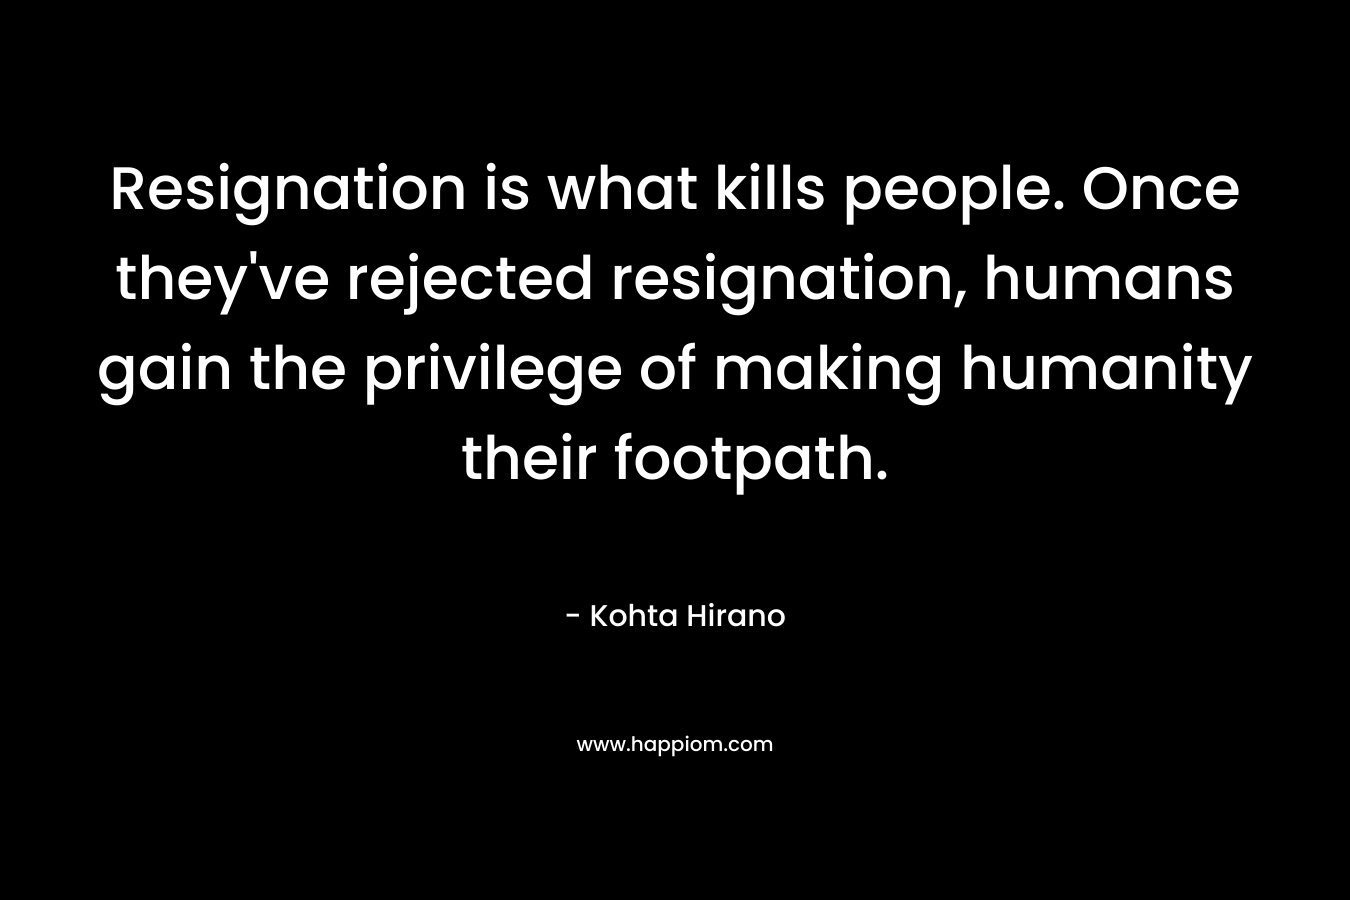 Resignation is what kills people. Once they’ve rejected resignation, humans gain the privilege of making humanity their footpath. – Kohta Hirano